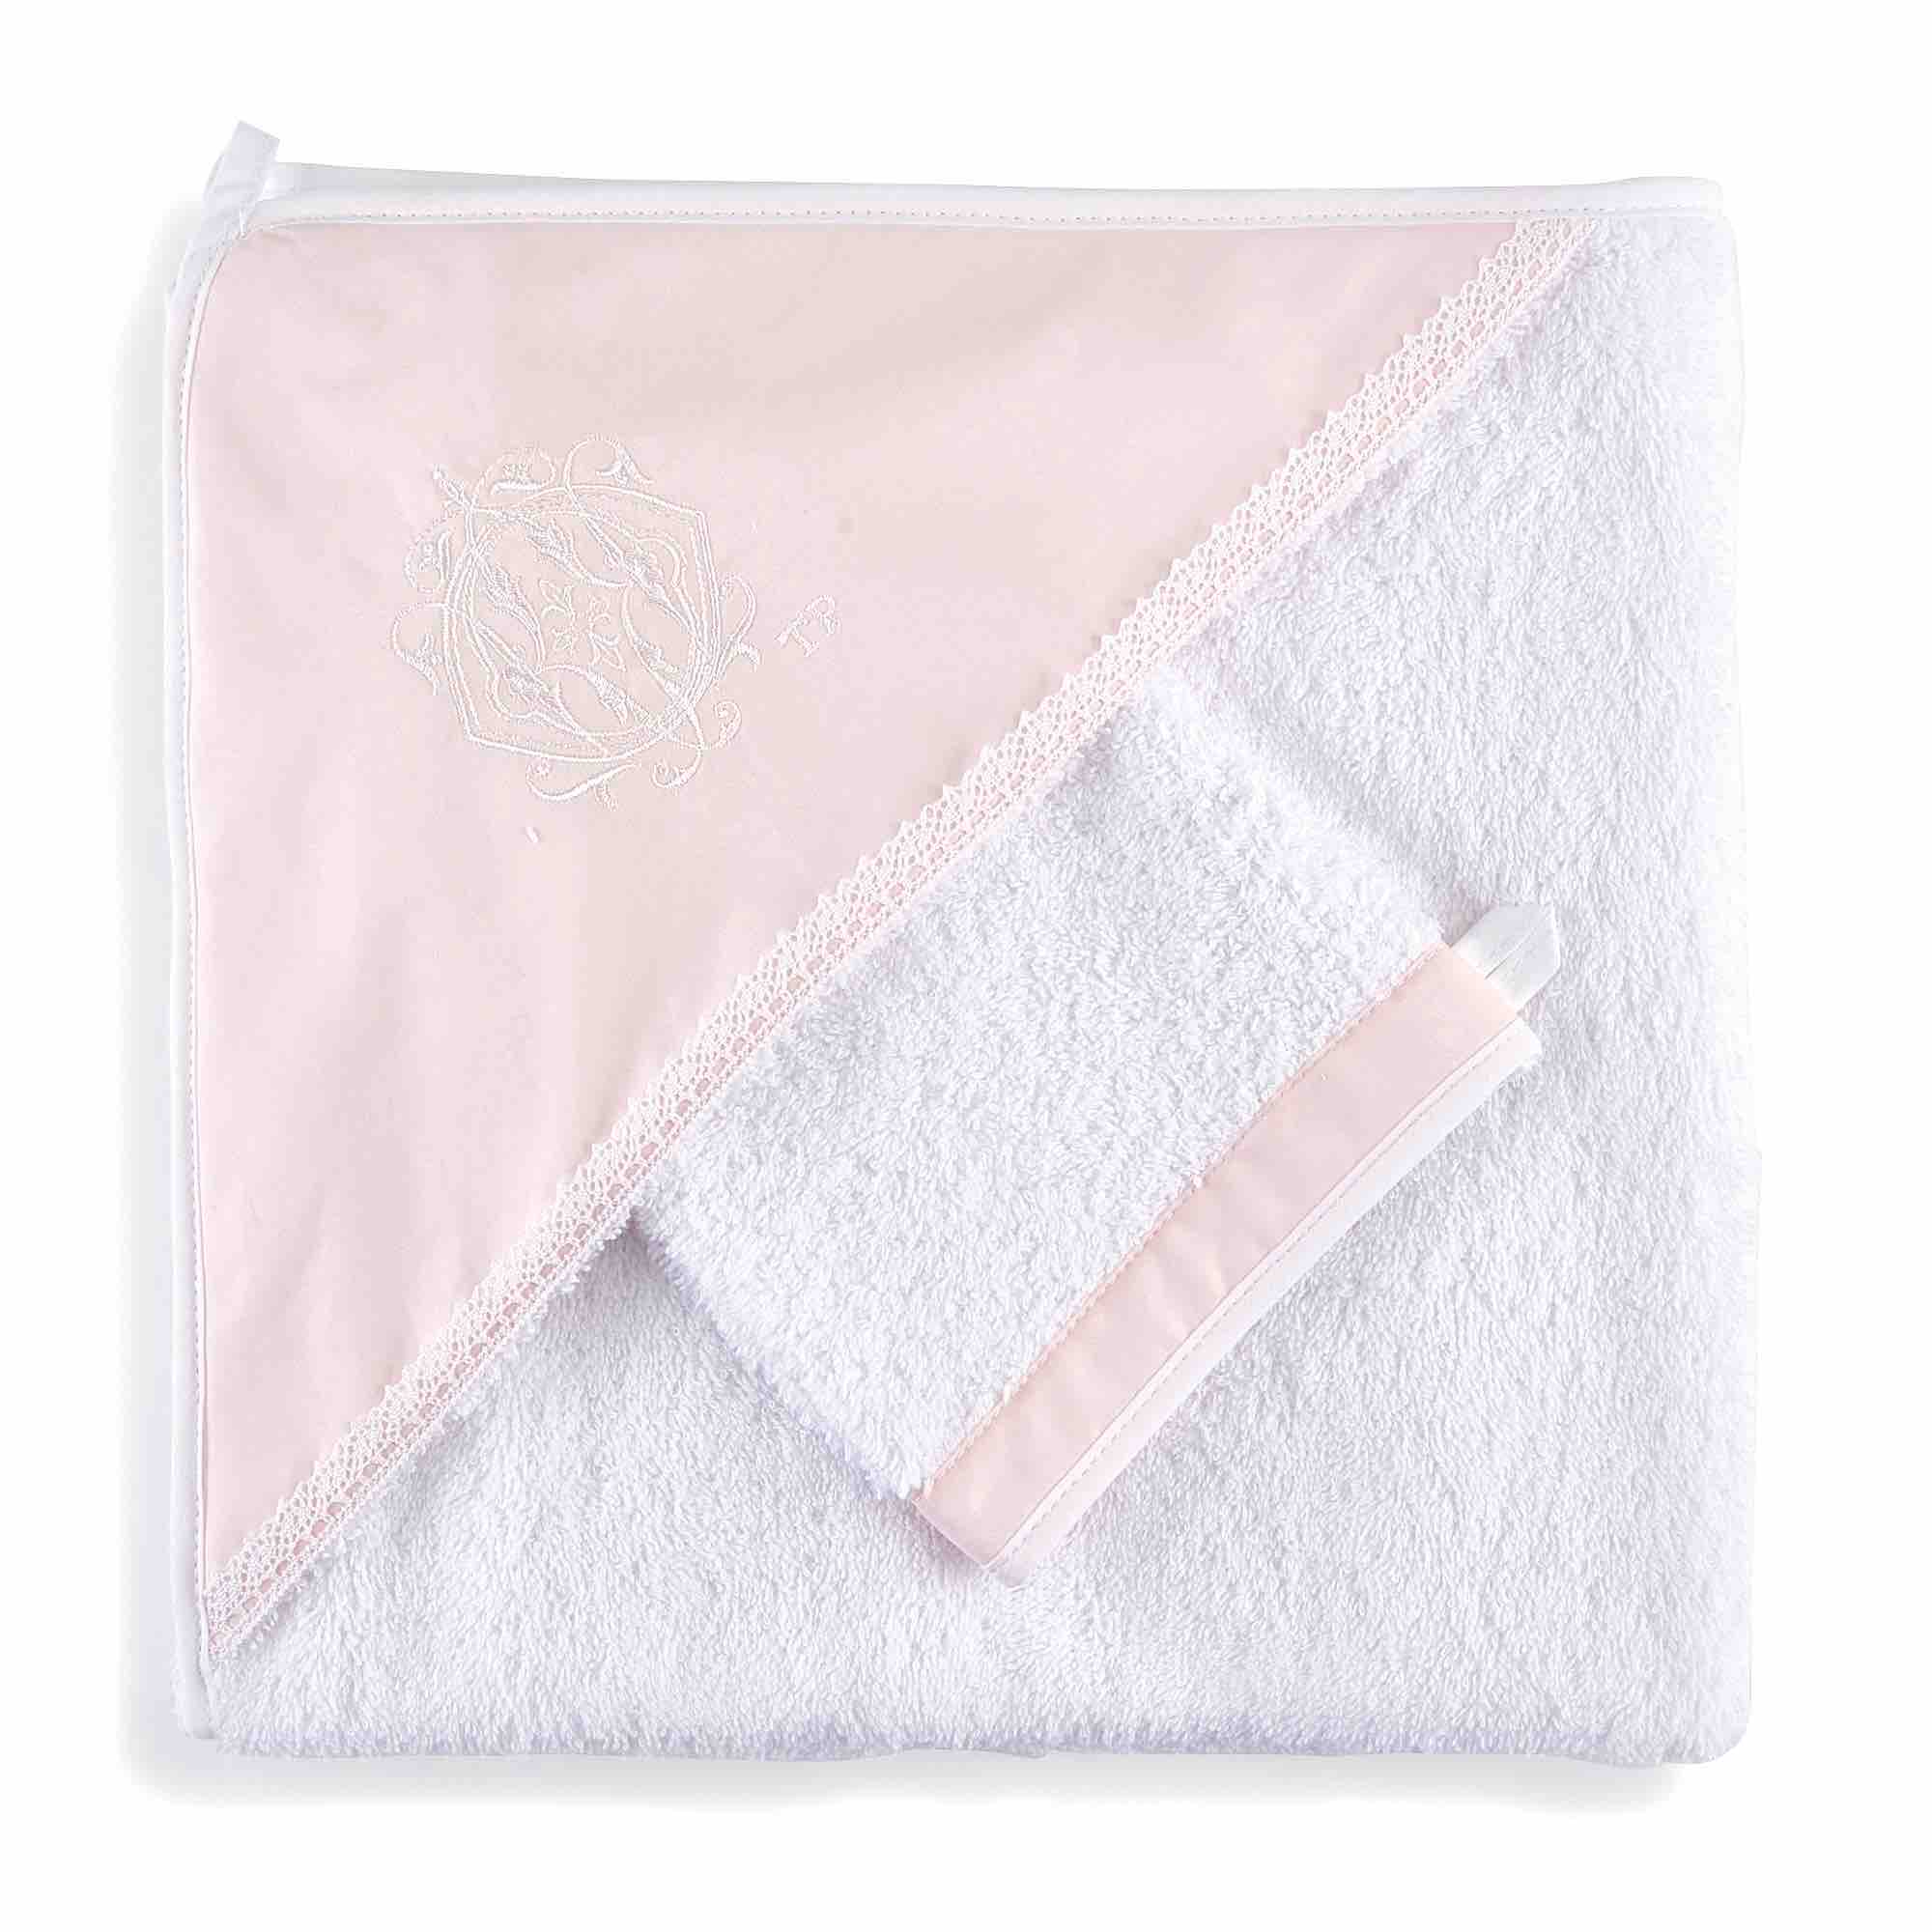 Theophile & Patachou Hooded Towel - Royal Pink